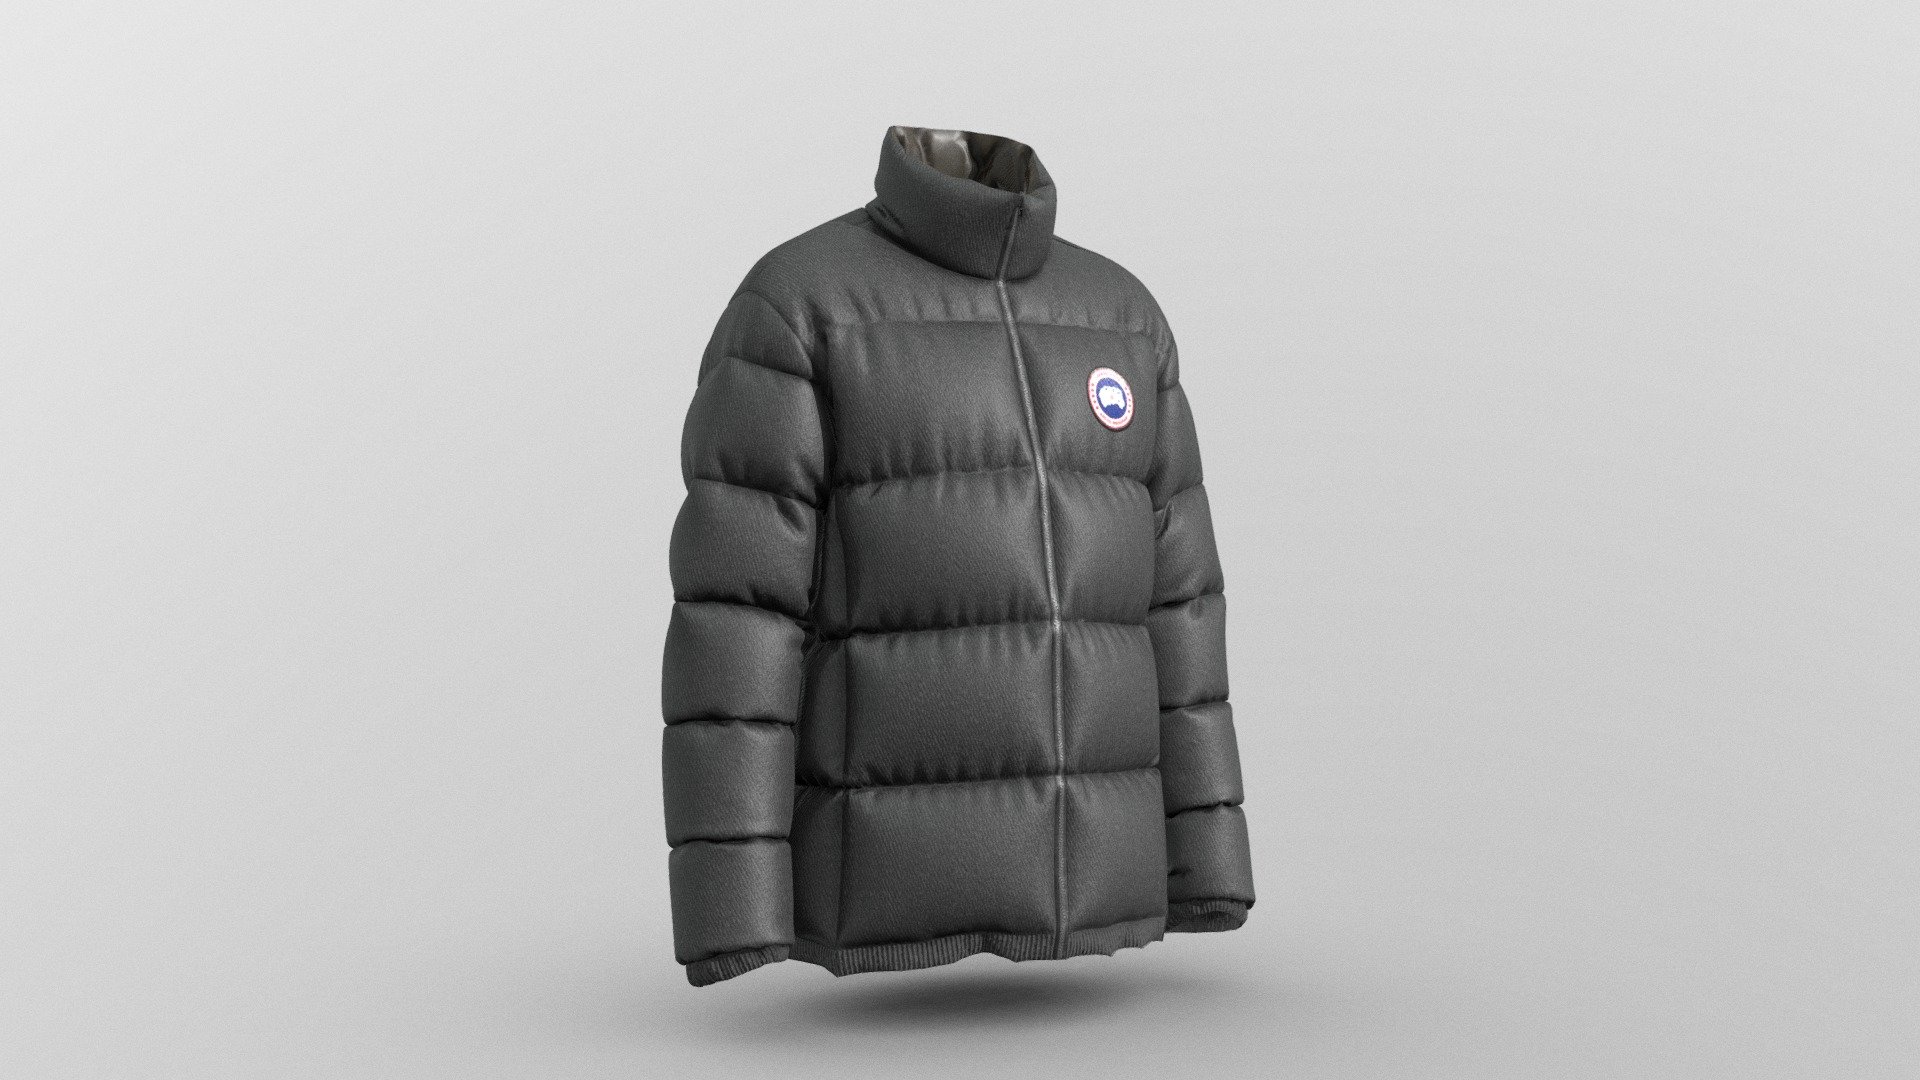 Canada Goose Winter Jacket created for application proposal for Canada Goose.

Middle Poly Version
Non-commercial model. 
Created with Marvelous Designer + Maya + RizomUV + Substance
4K PBR Textures

Can be updated as a low poly version 3d model